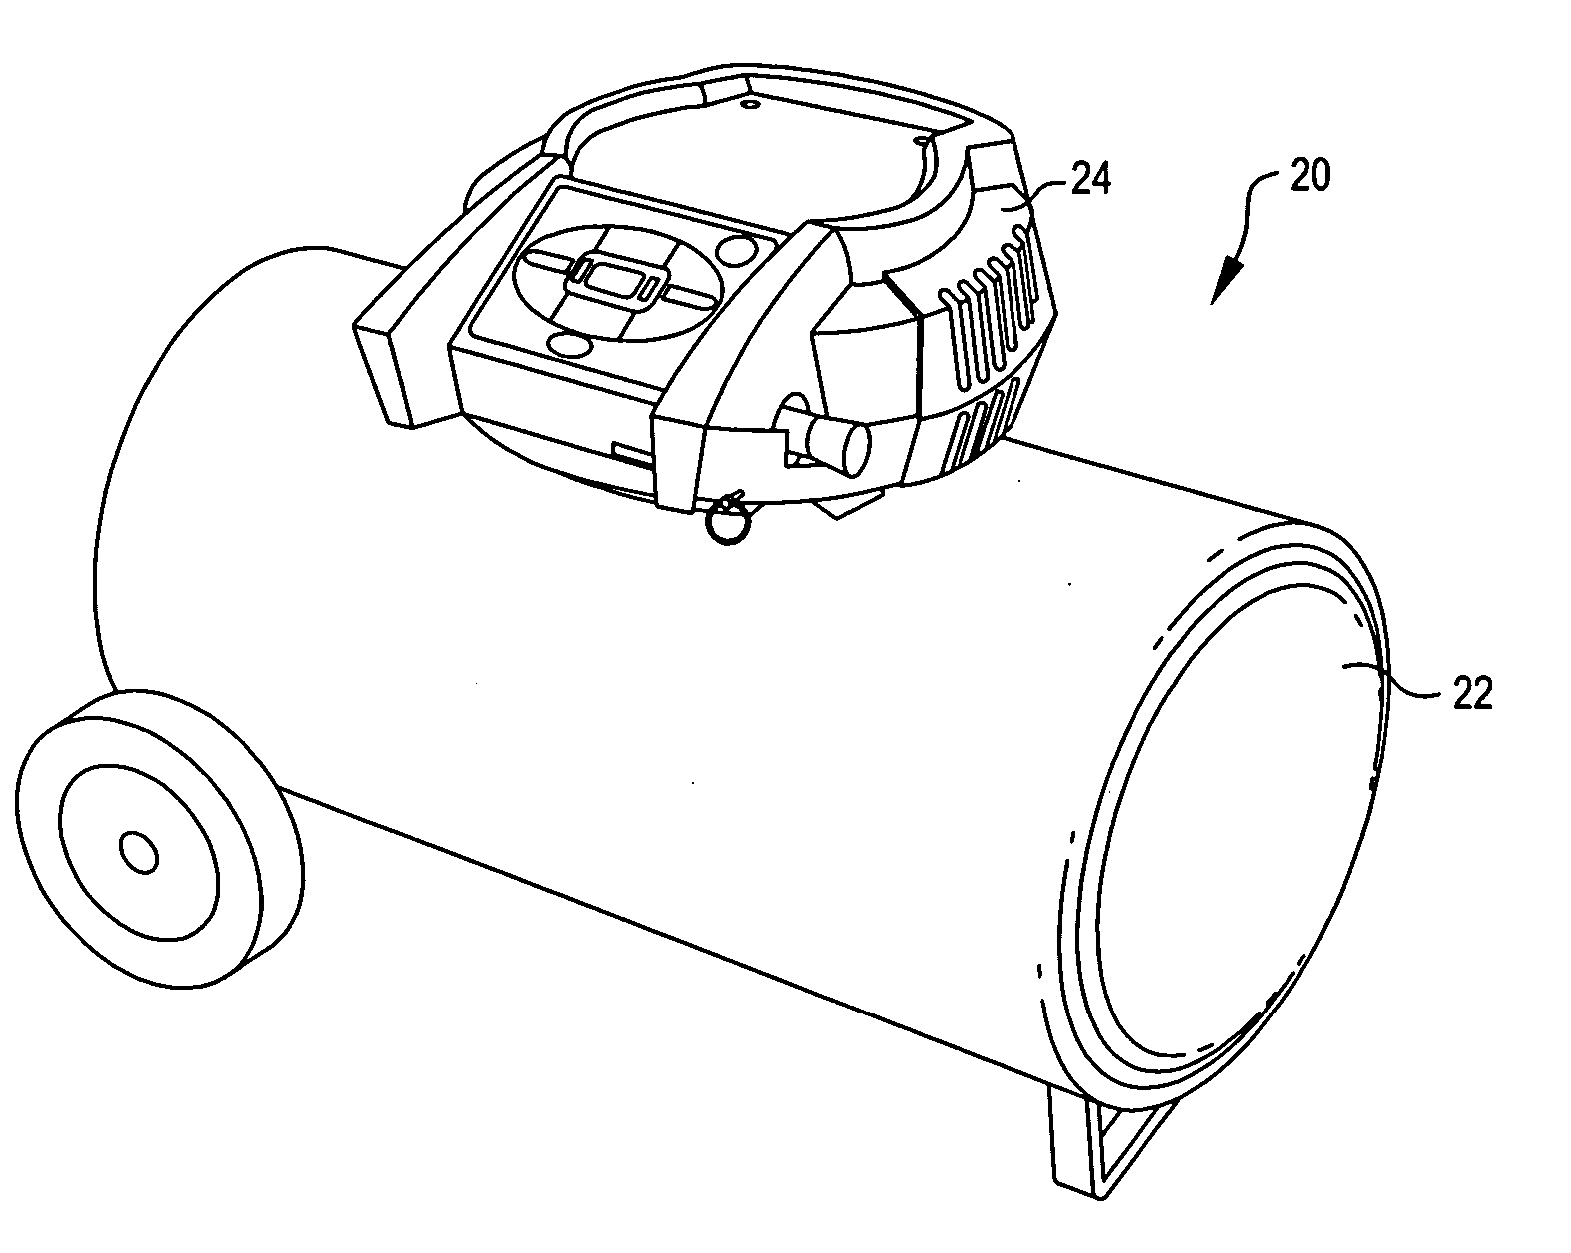 Air compressor tools that communicate with an air compressor